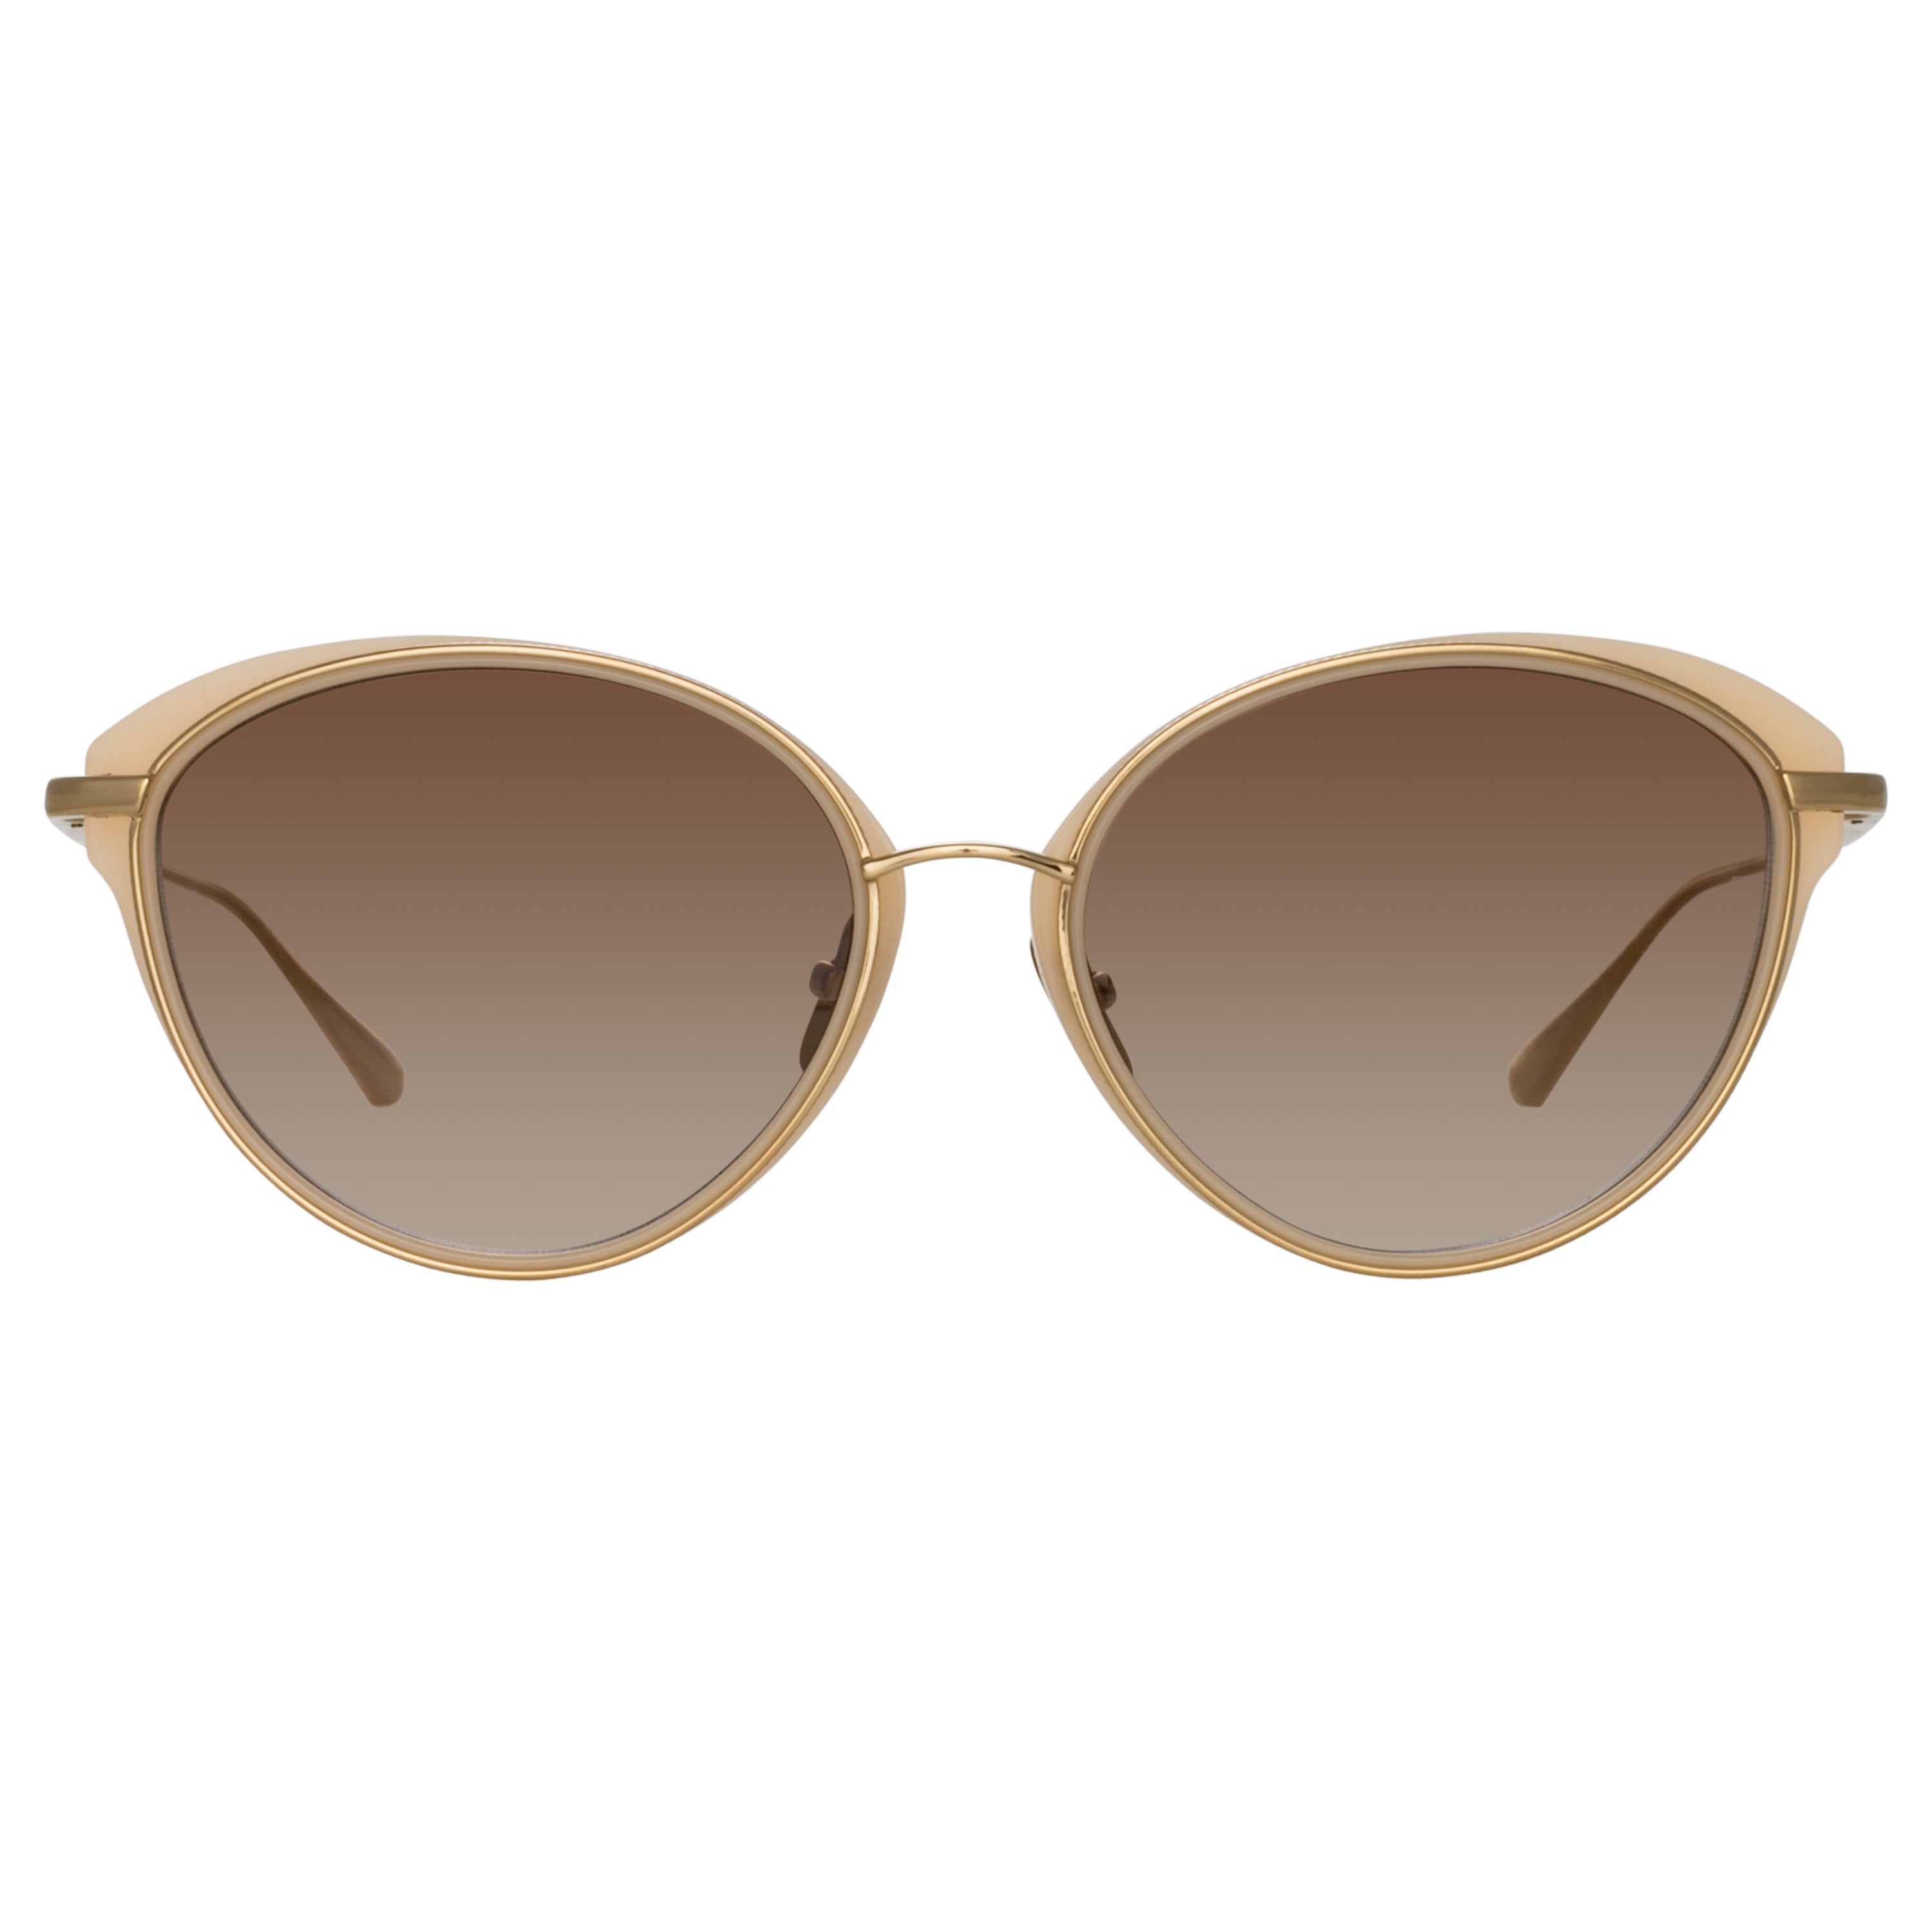 SONG CAT EYE SUNGLASSES IN LIGHT GOLD AND PEACH - 1